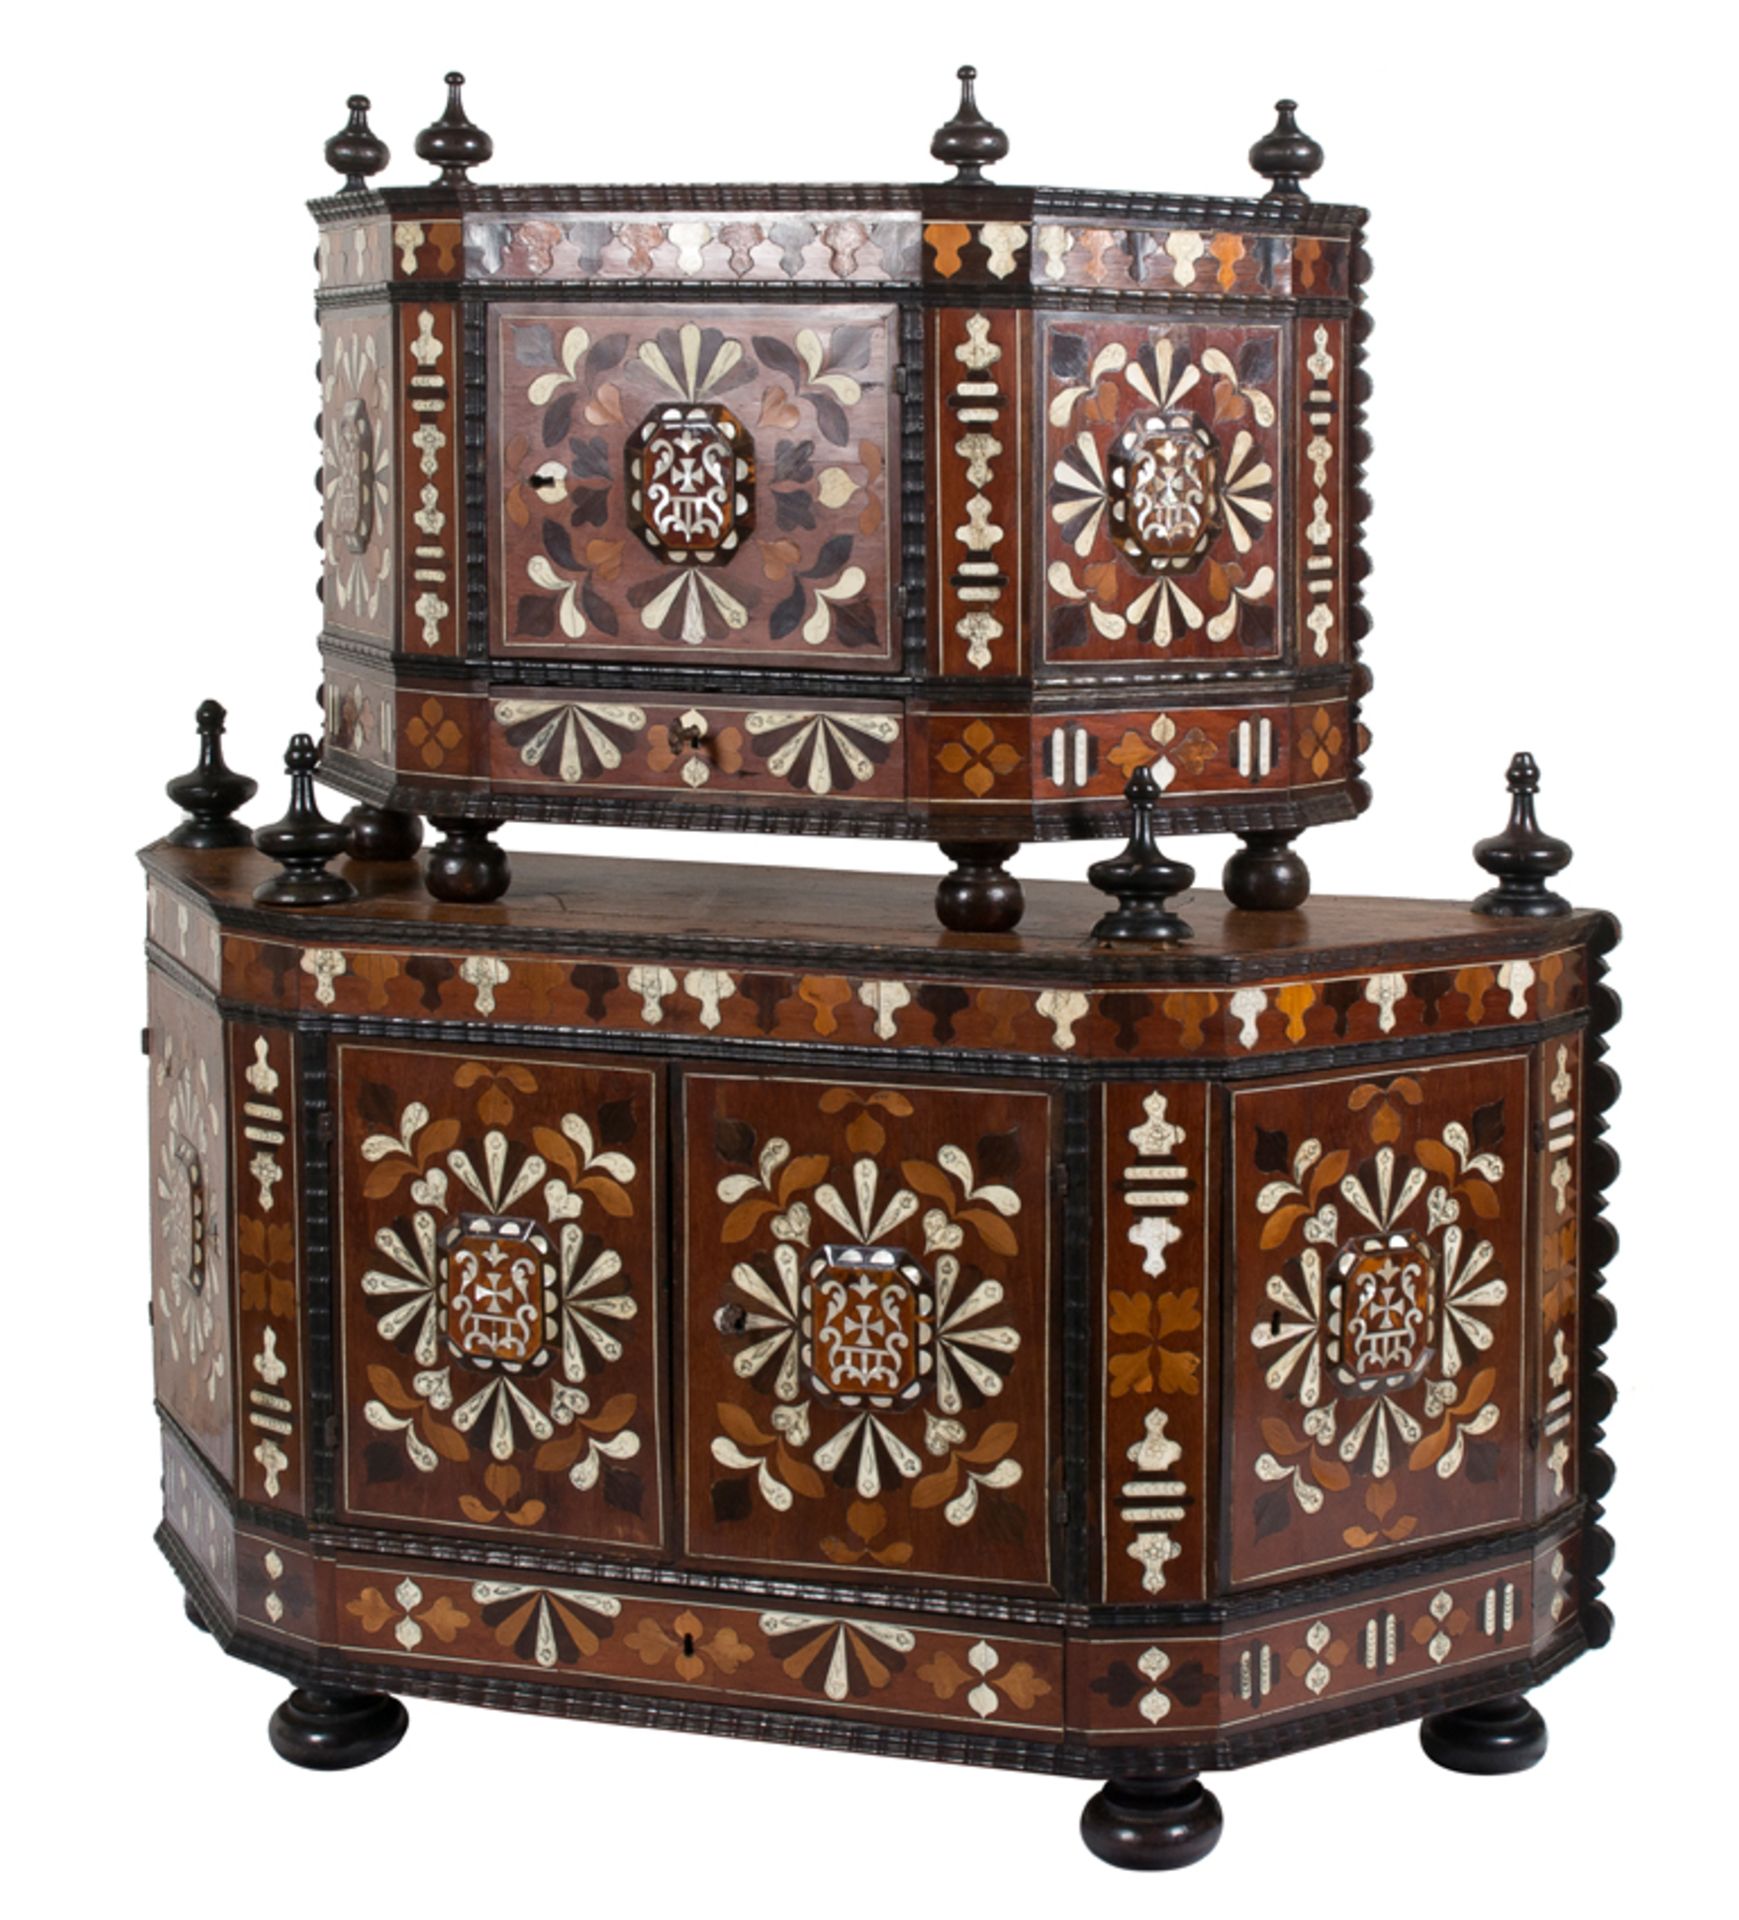 Imposing writing cabinet set with its "contador". Lima. Viceroyalty of Peru. 18th century. - Image 2 of 9